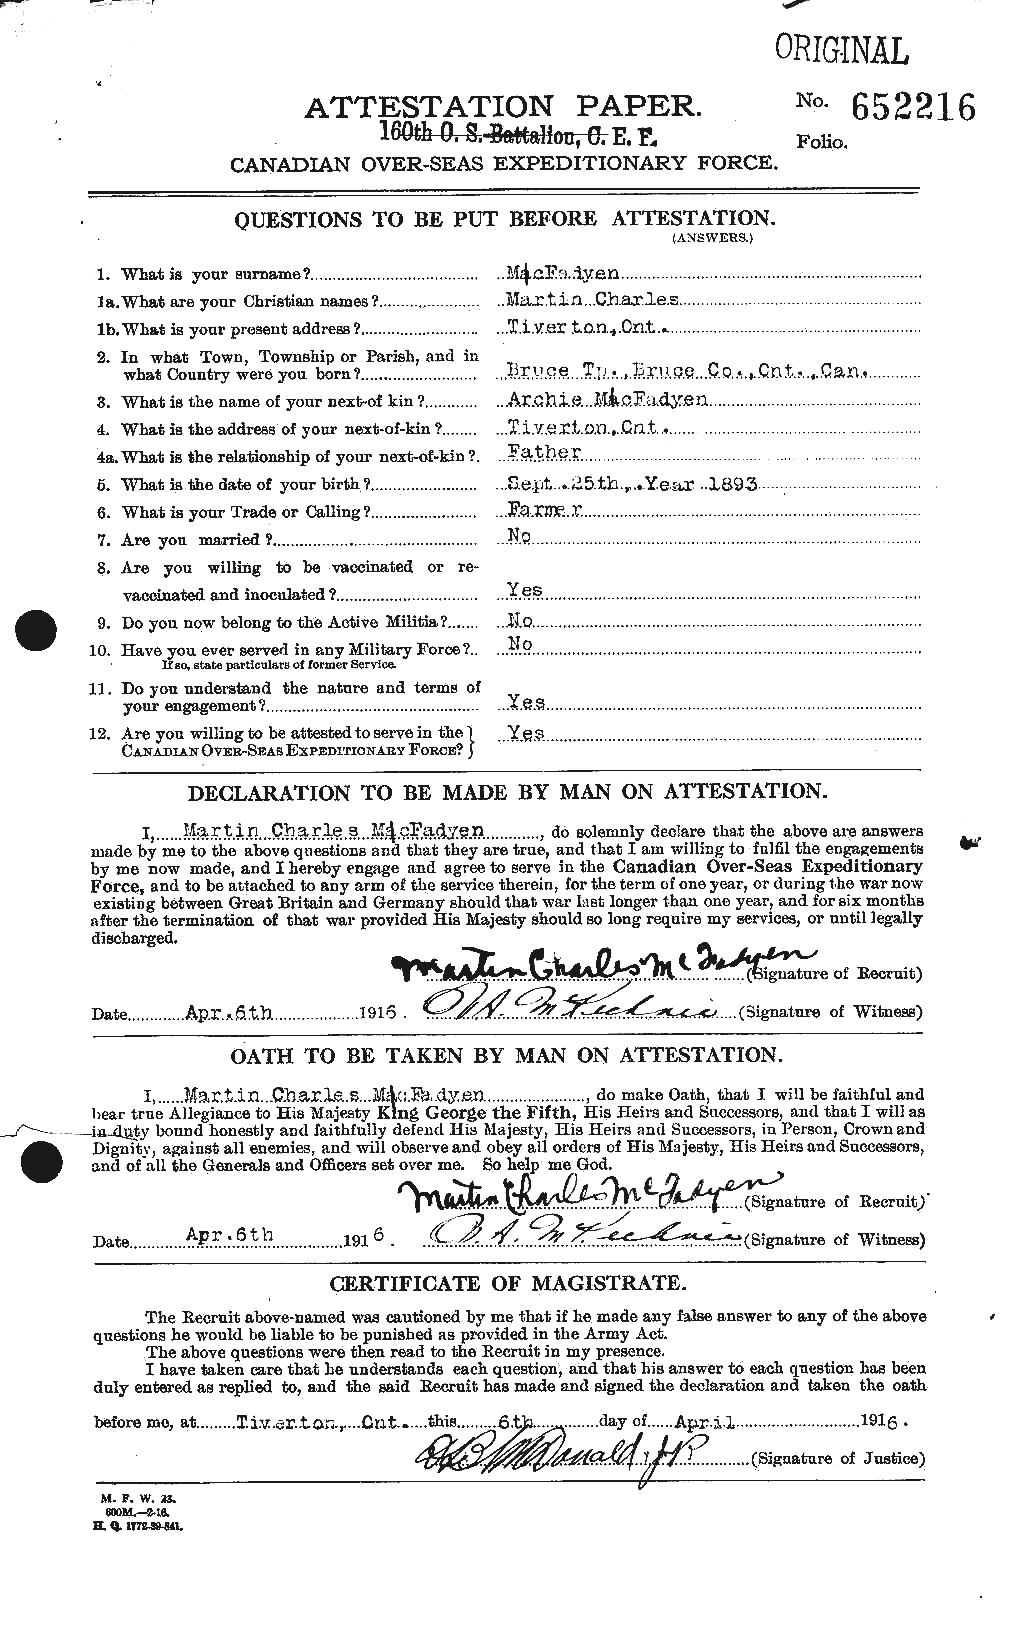 Personnel Records of the First World War - CEF 521199a